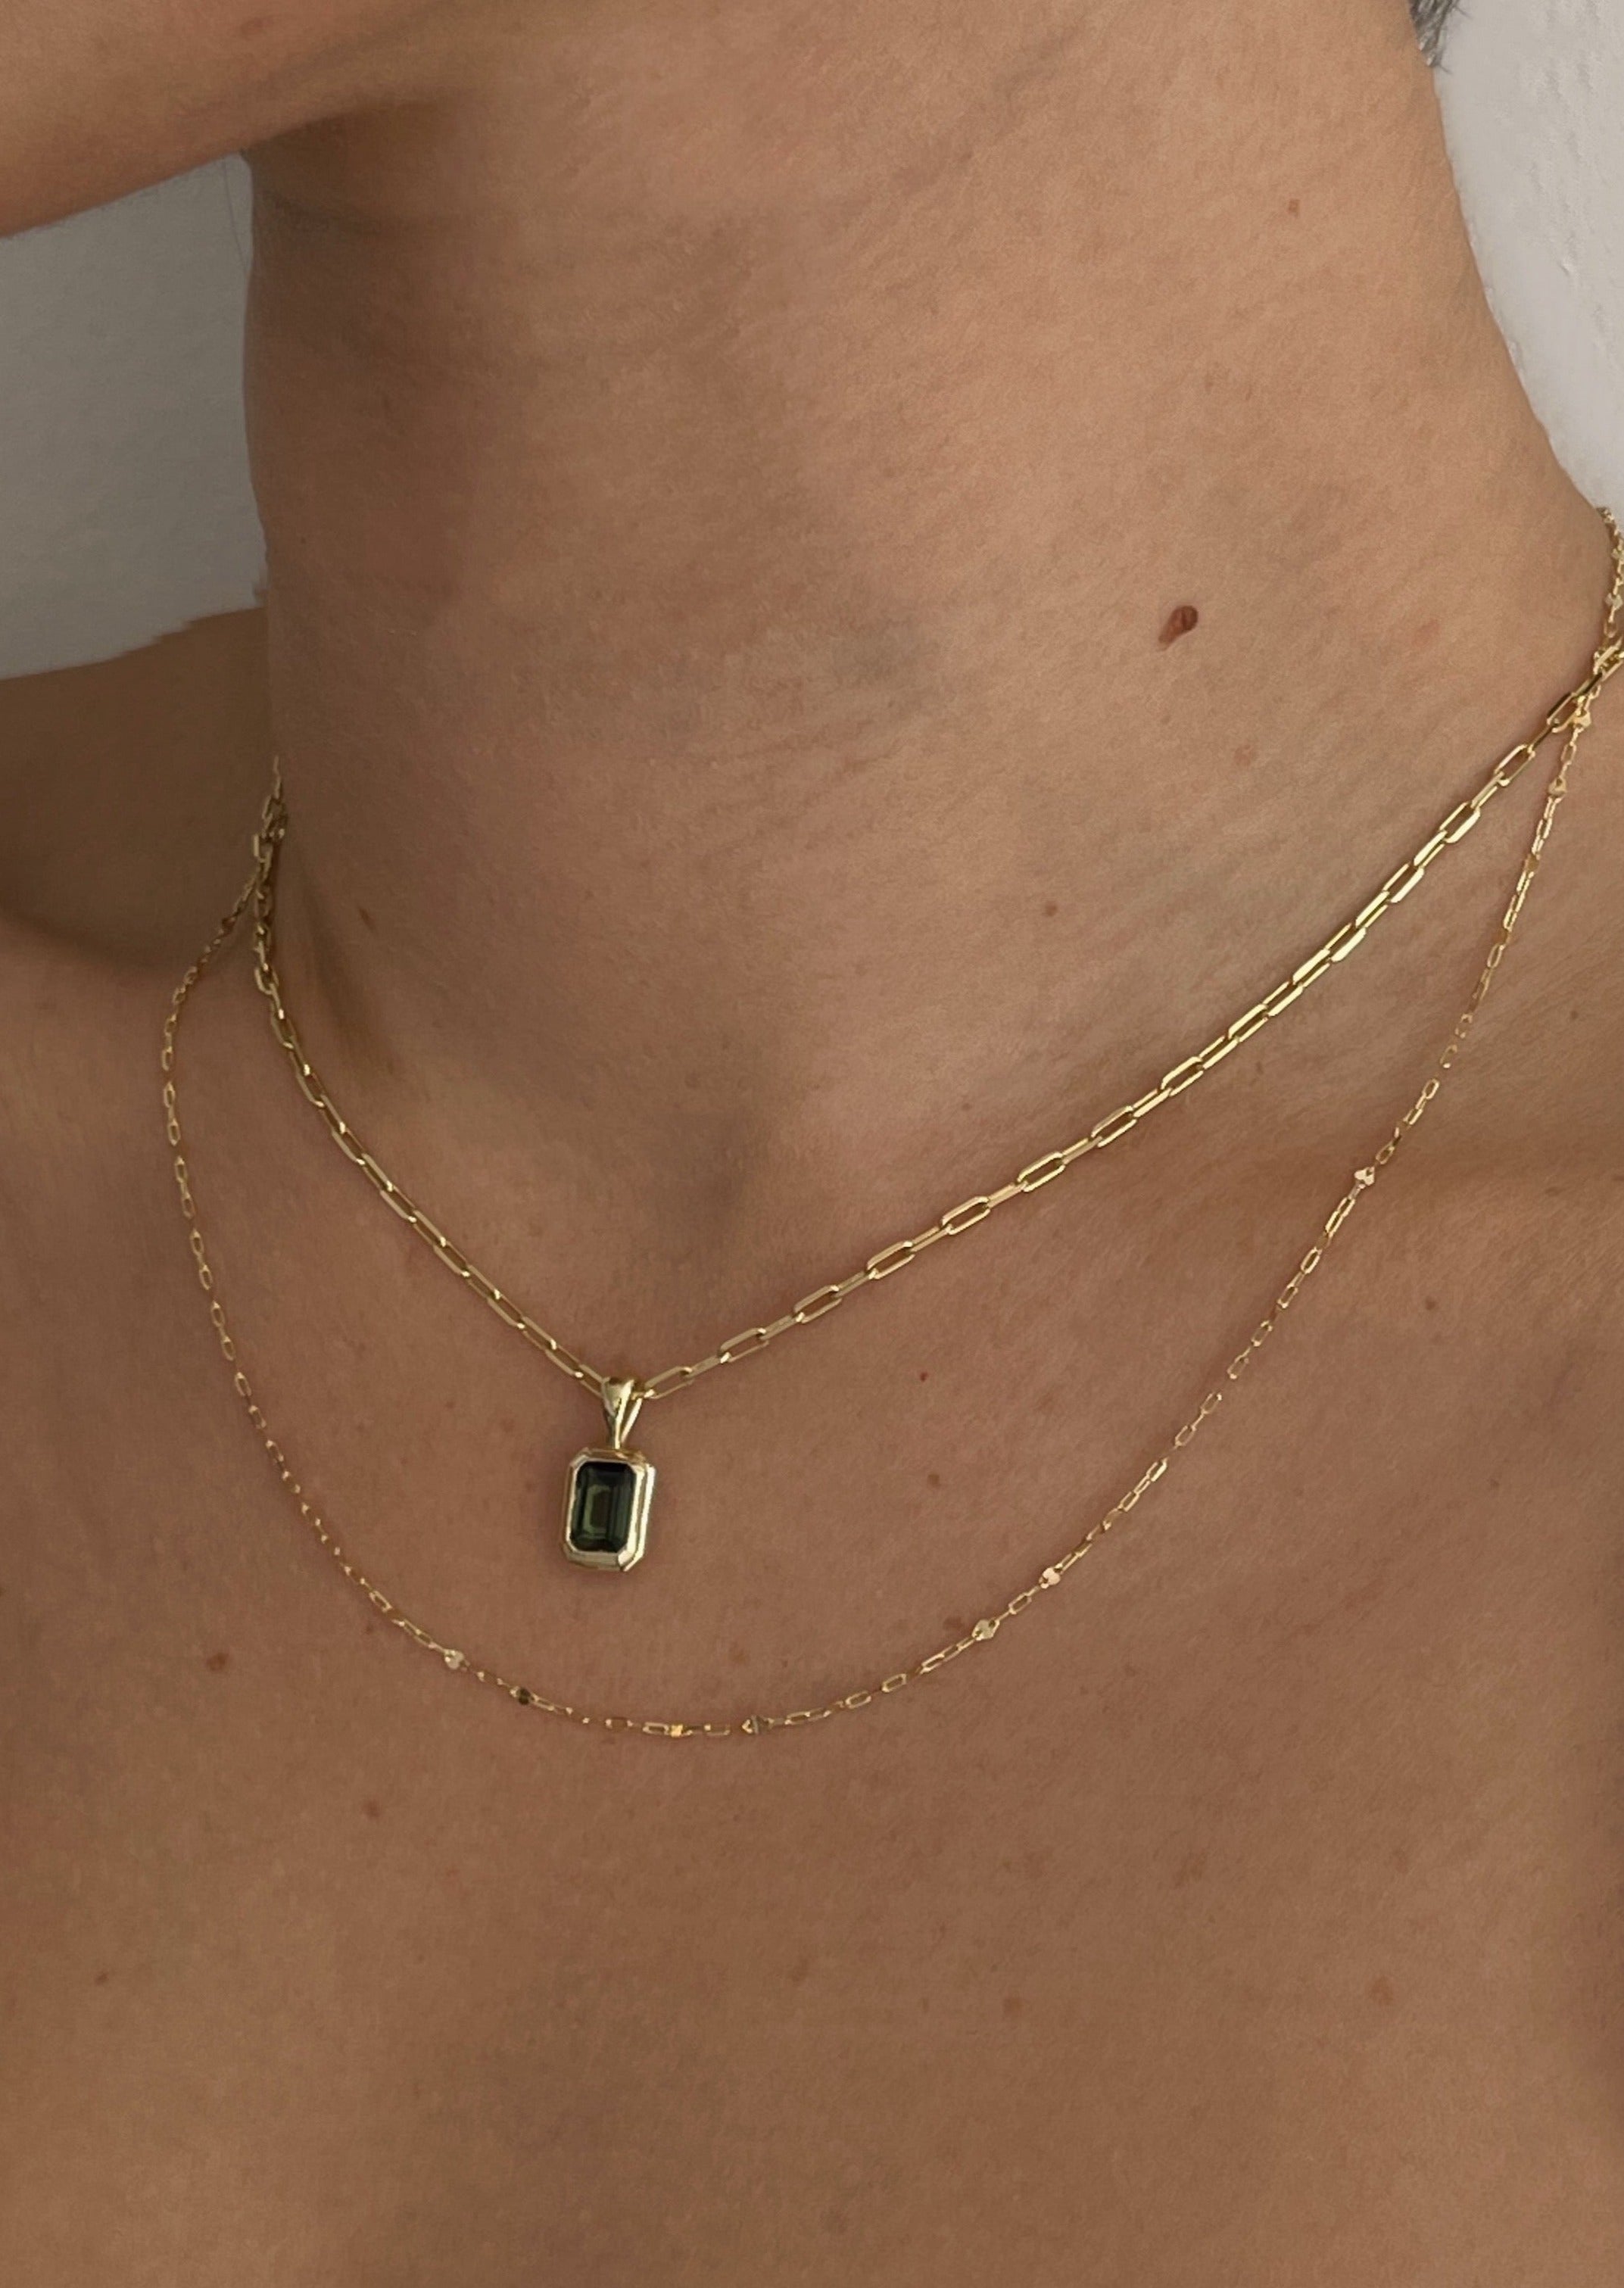 alt="Pico Link Chain Necklace with Lyra II and the diamond cut rolo necklace"